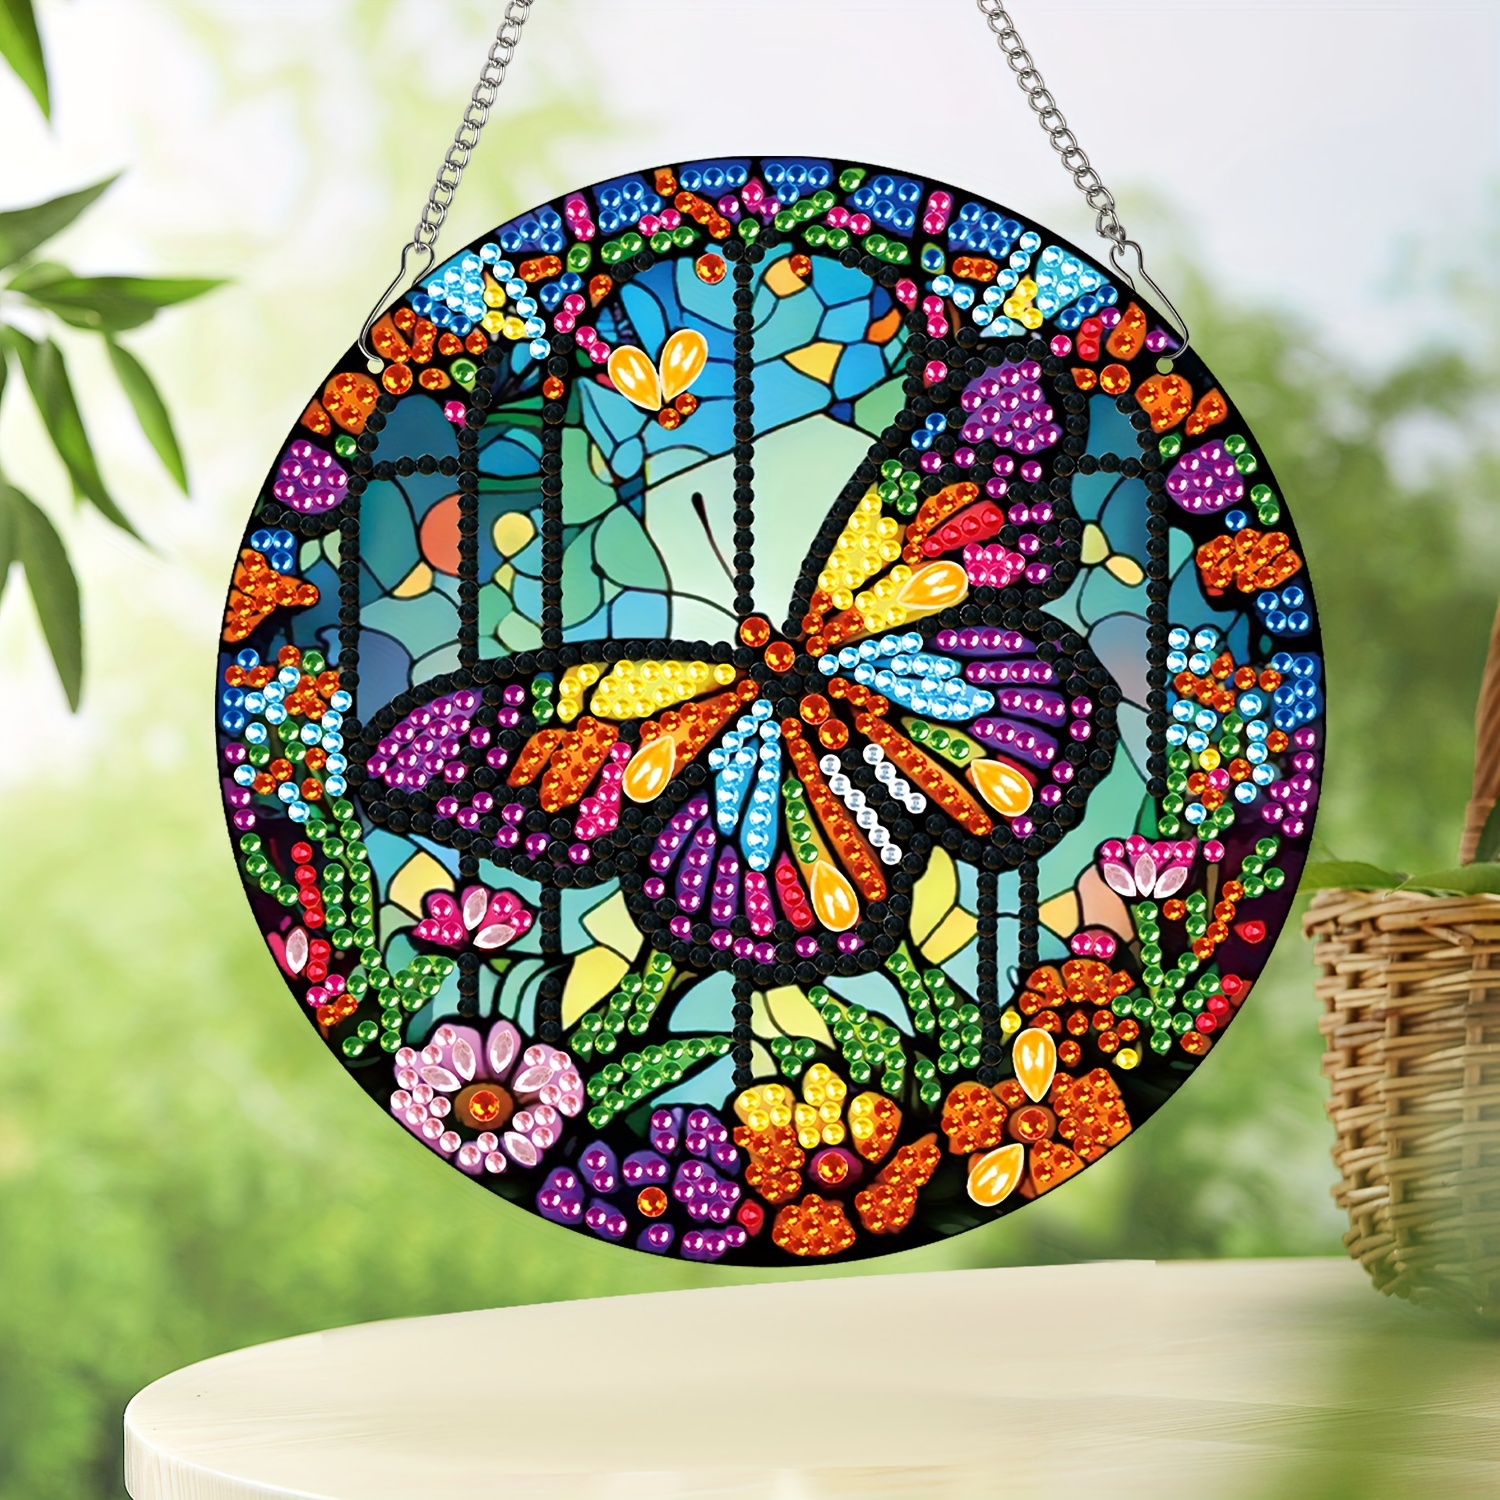 Diamond Painting Hanging, Butterfly 3D Three-dimensional Diamond Painting  Kit, Diamond Art Hanging Jewelry, Suitable For Home Wall Garden Decoration U